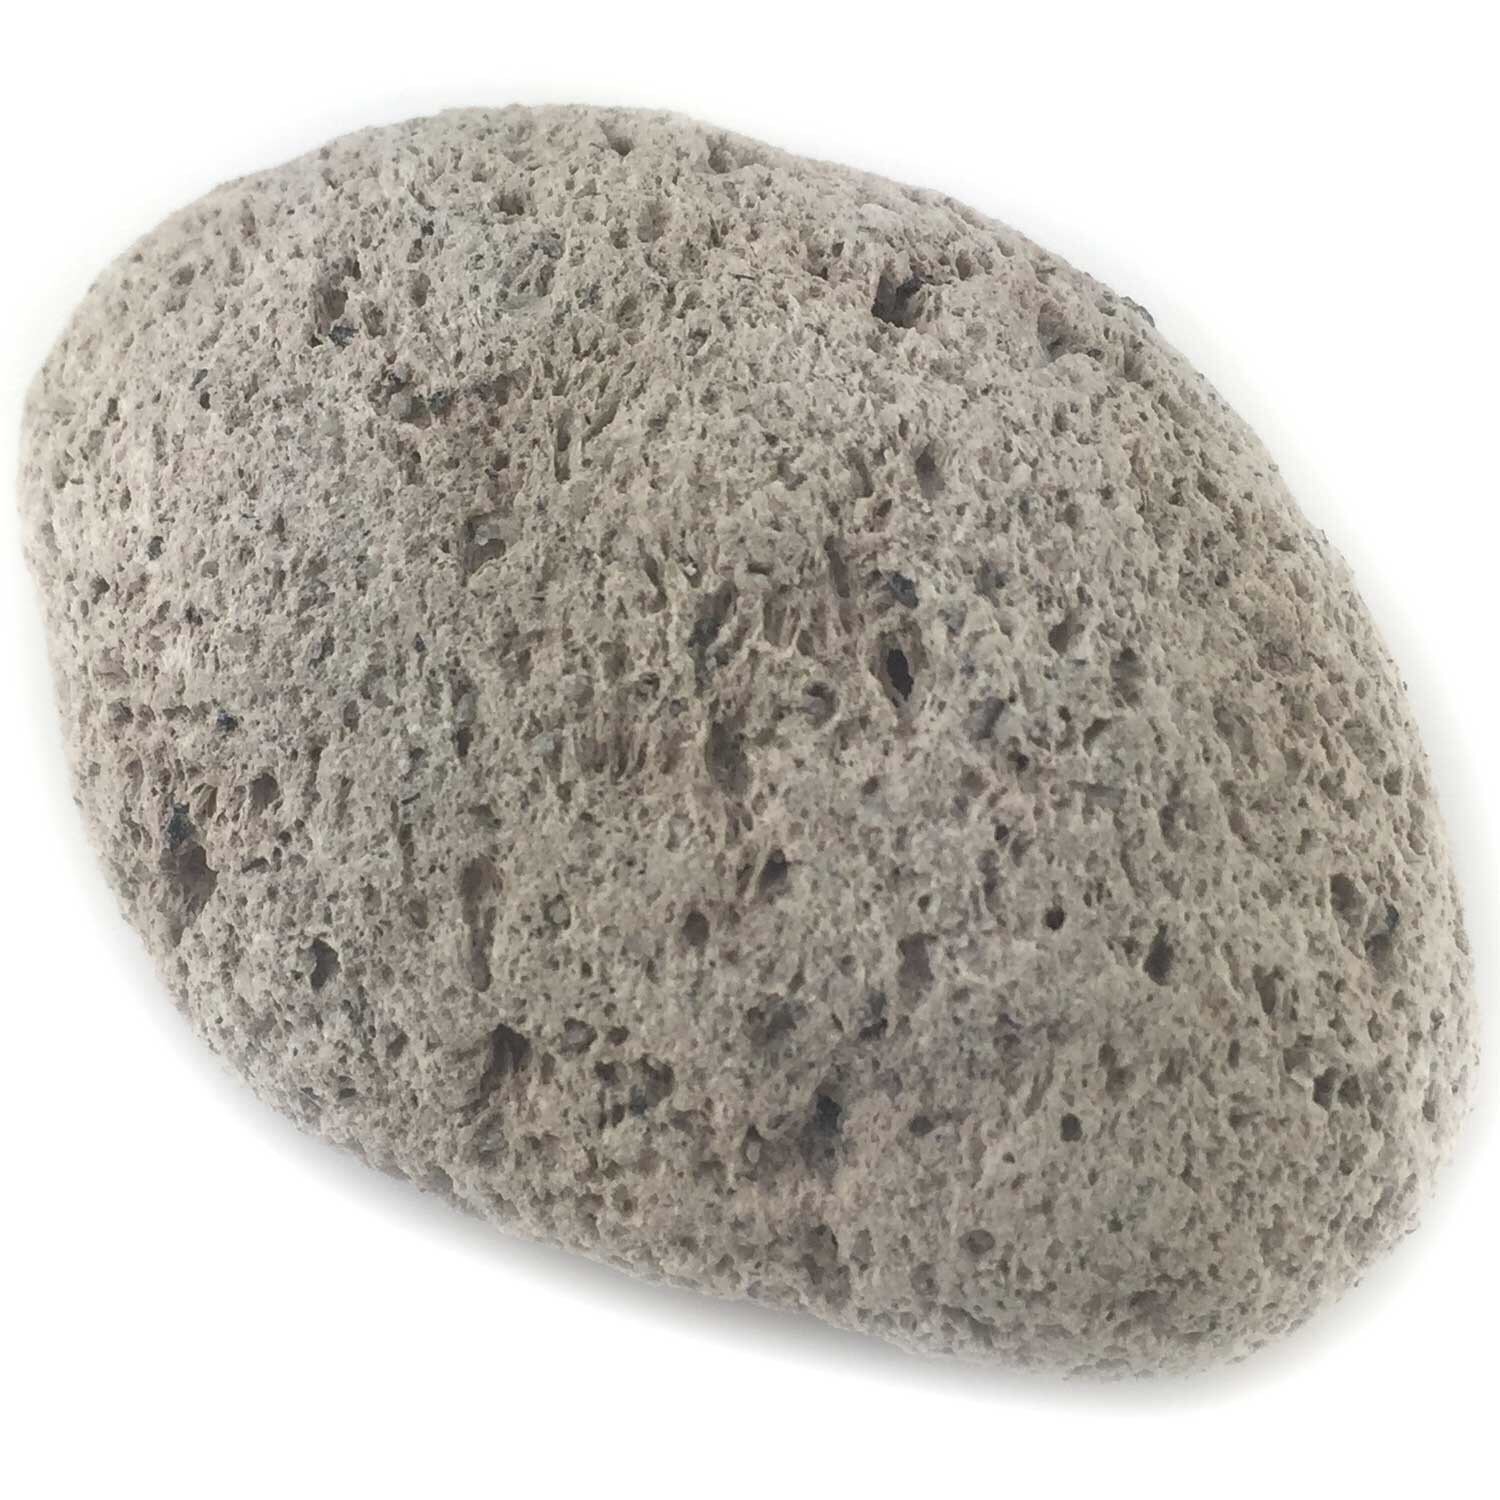 Pumice Stone - Natural, Skincare for Athletes All Natural Handmade